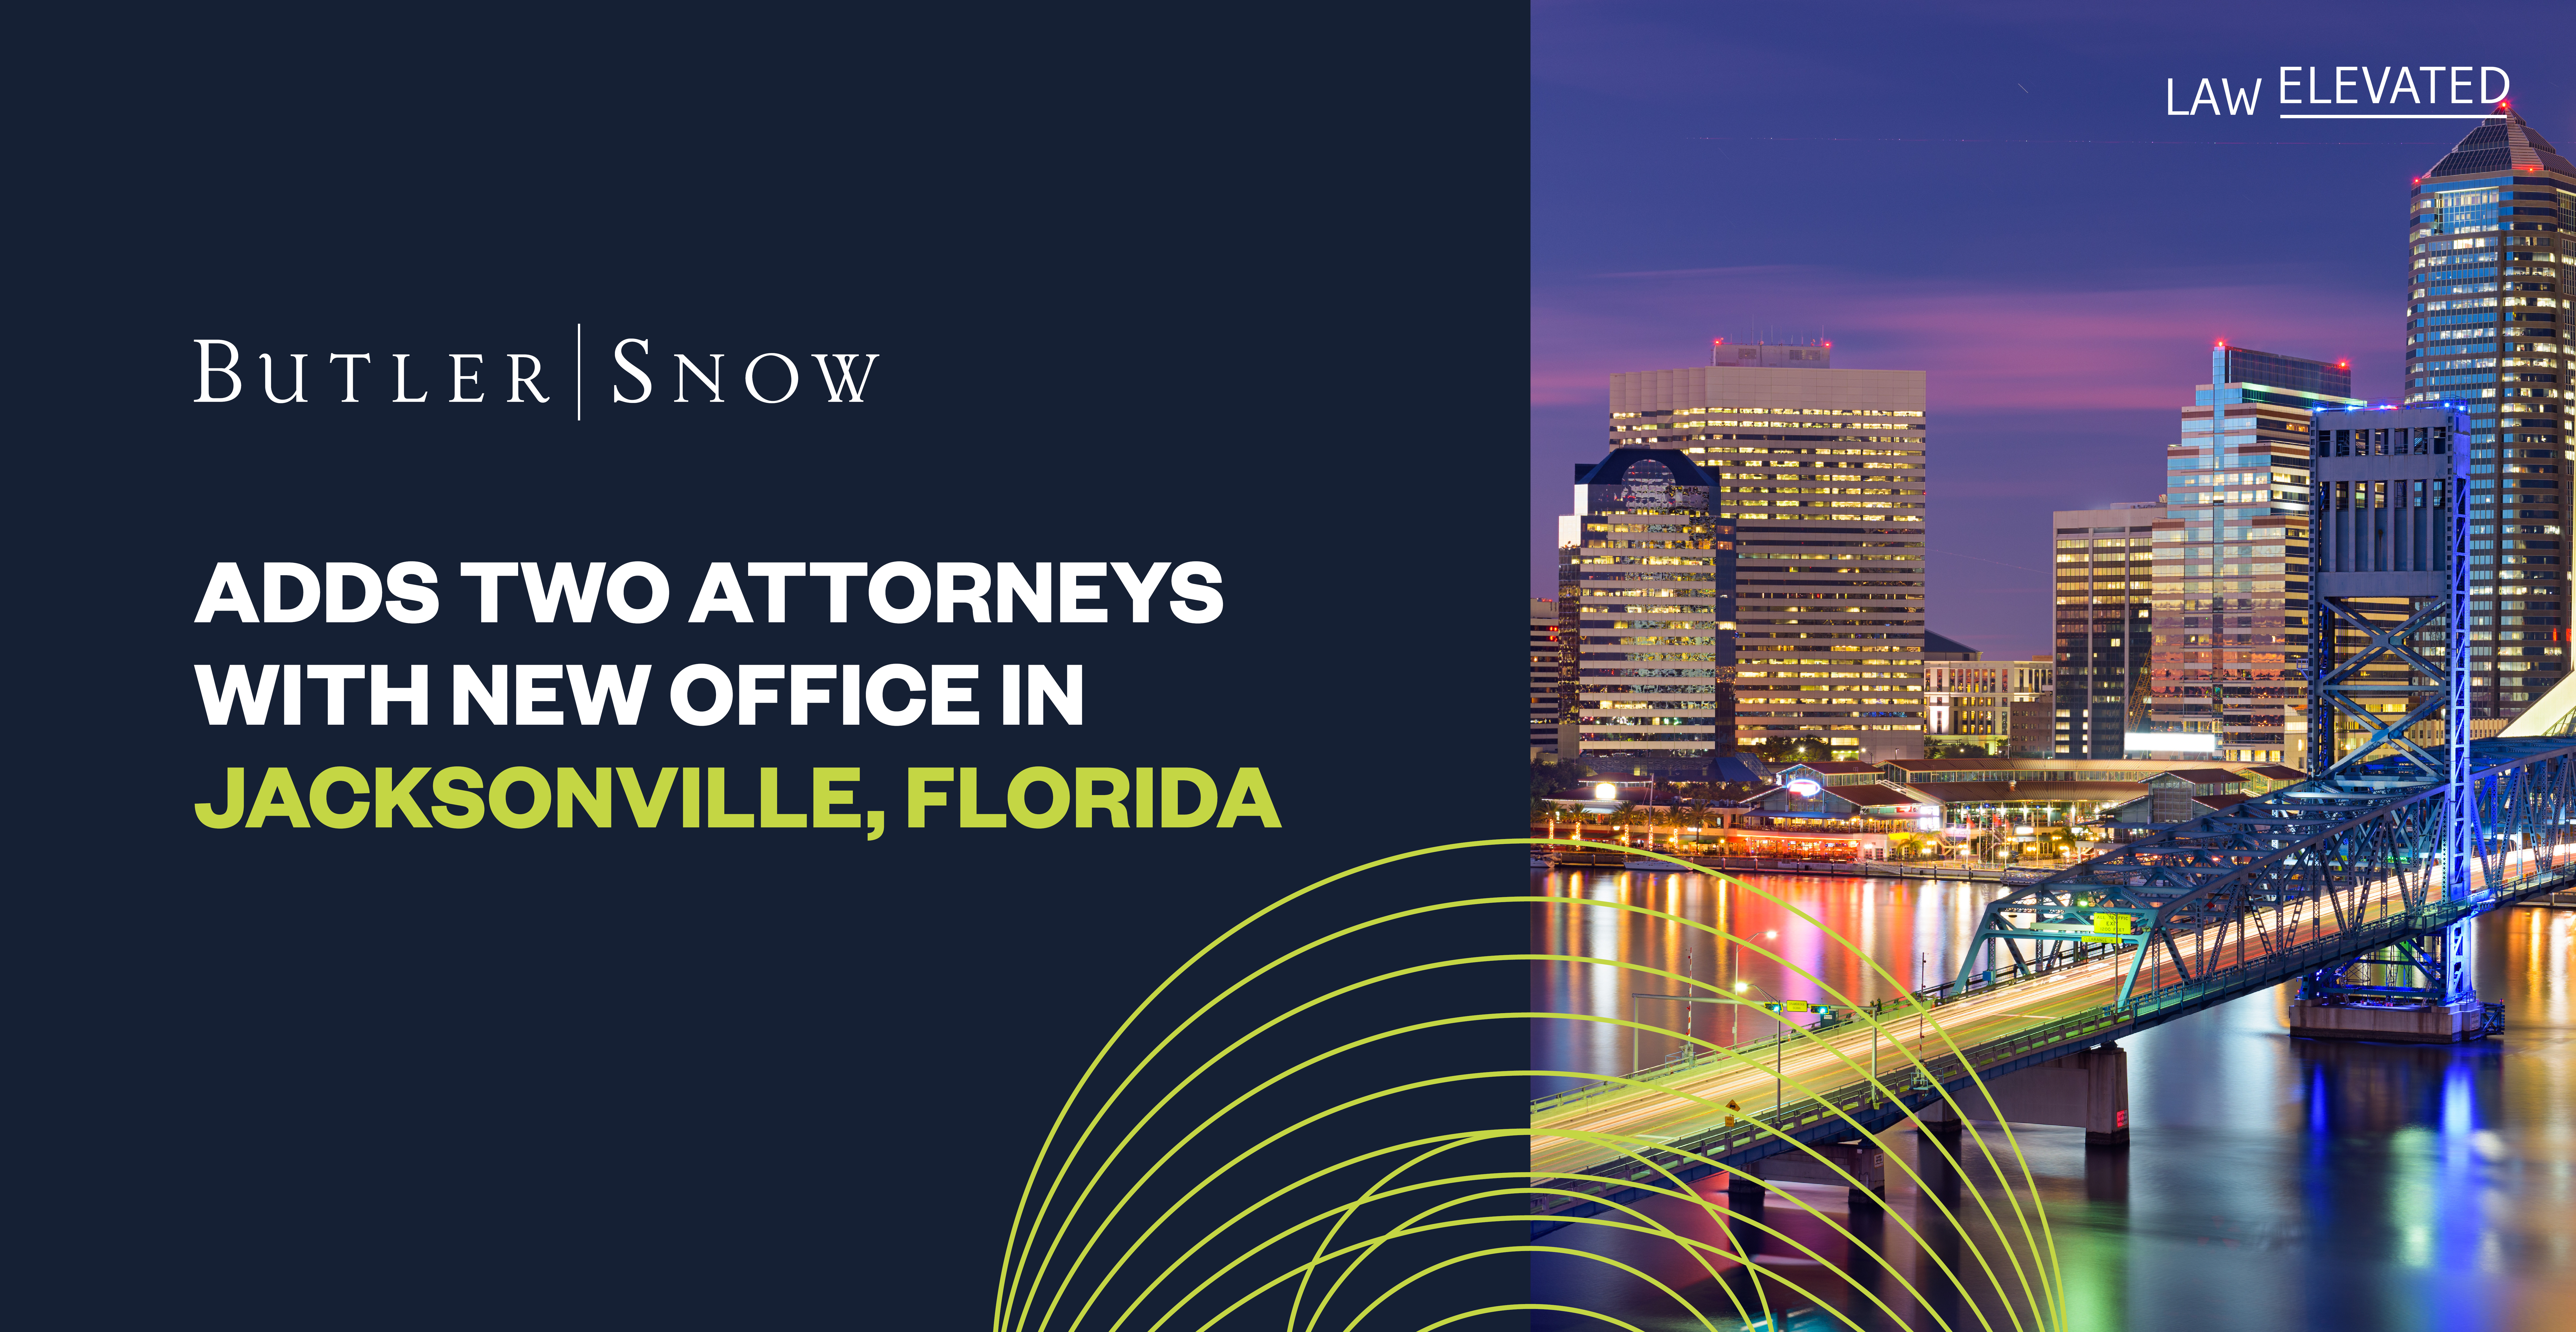 Butler Snow Adds Two Attorneys with New Office in Jacksonville, Florida